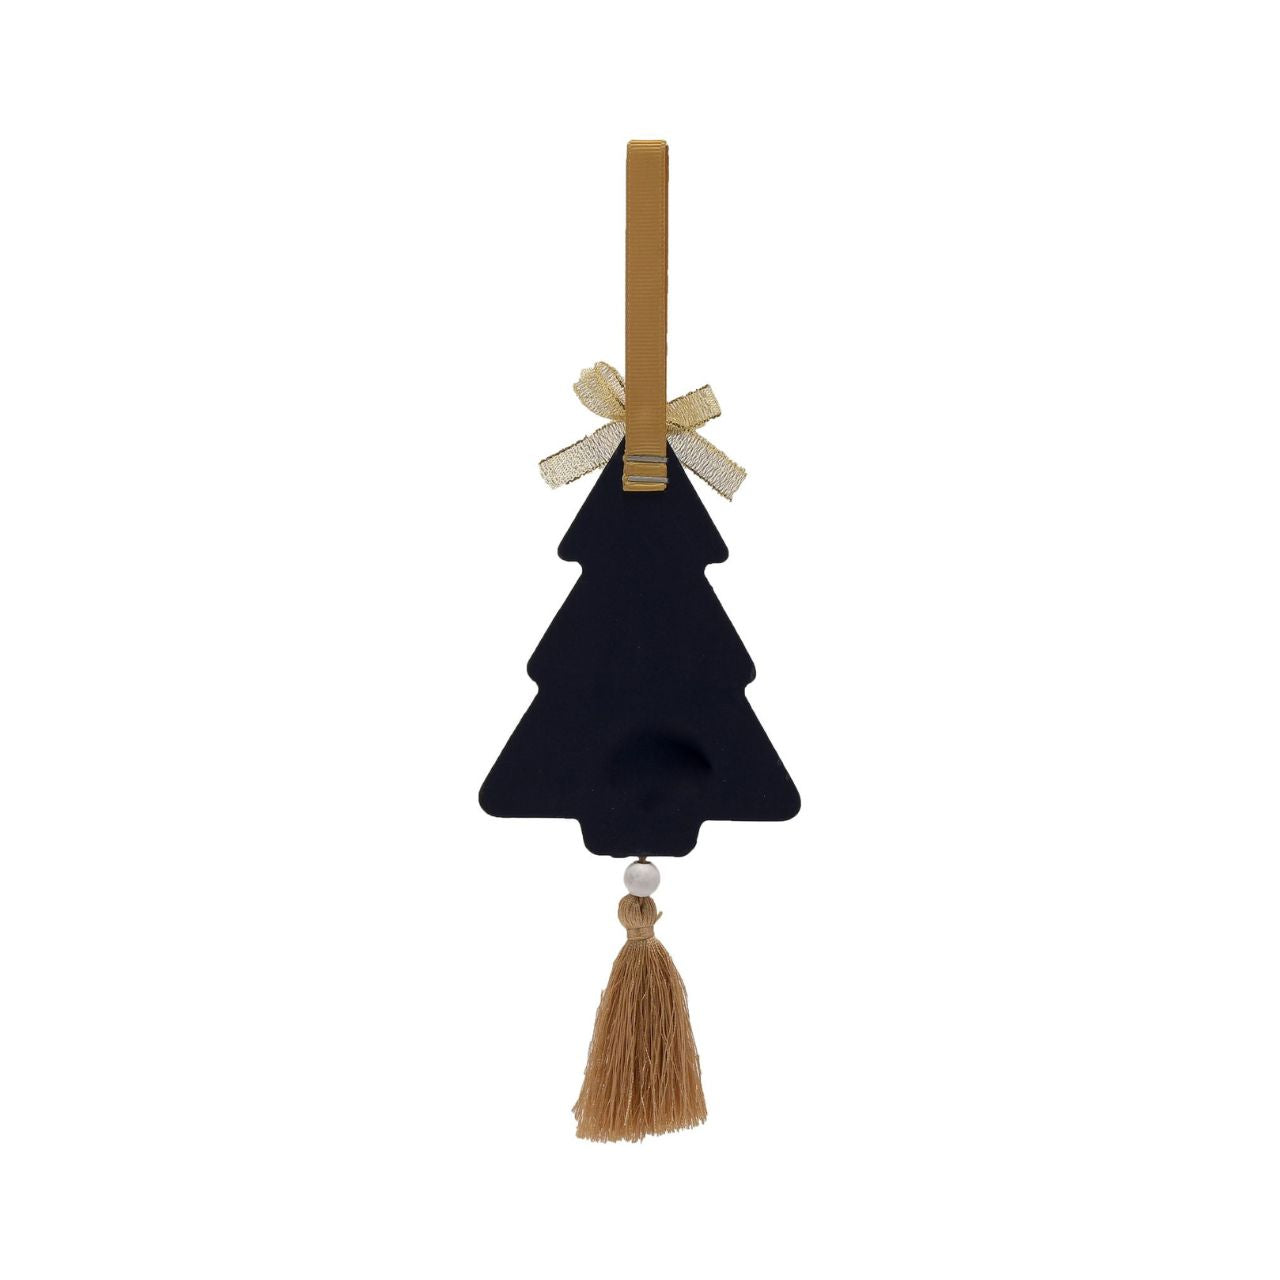 Christmas Tree Hanging Decoration Celestial  A celestial Christmas tree hanging decoration.  This celestial decoration take inspiration from the stars for standout display on the Christmas tree.